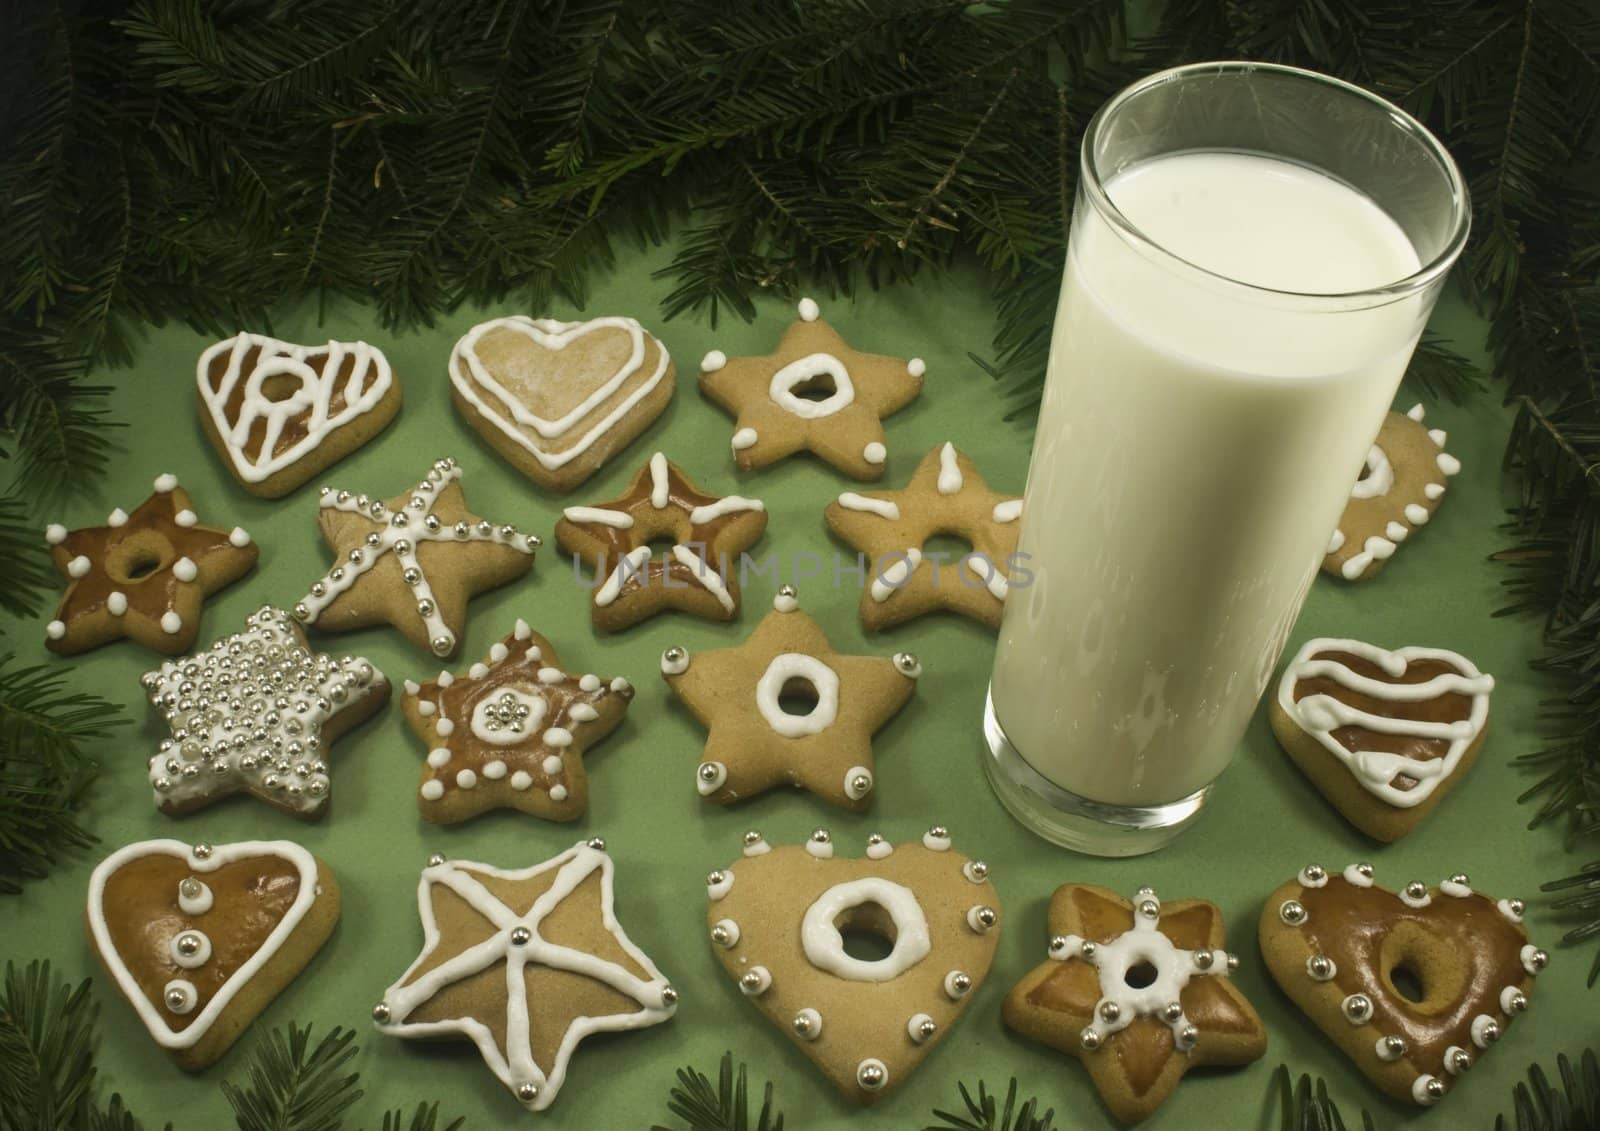 A variety of decorated Christmas cookies with a glass of milk surrounded by fir branches